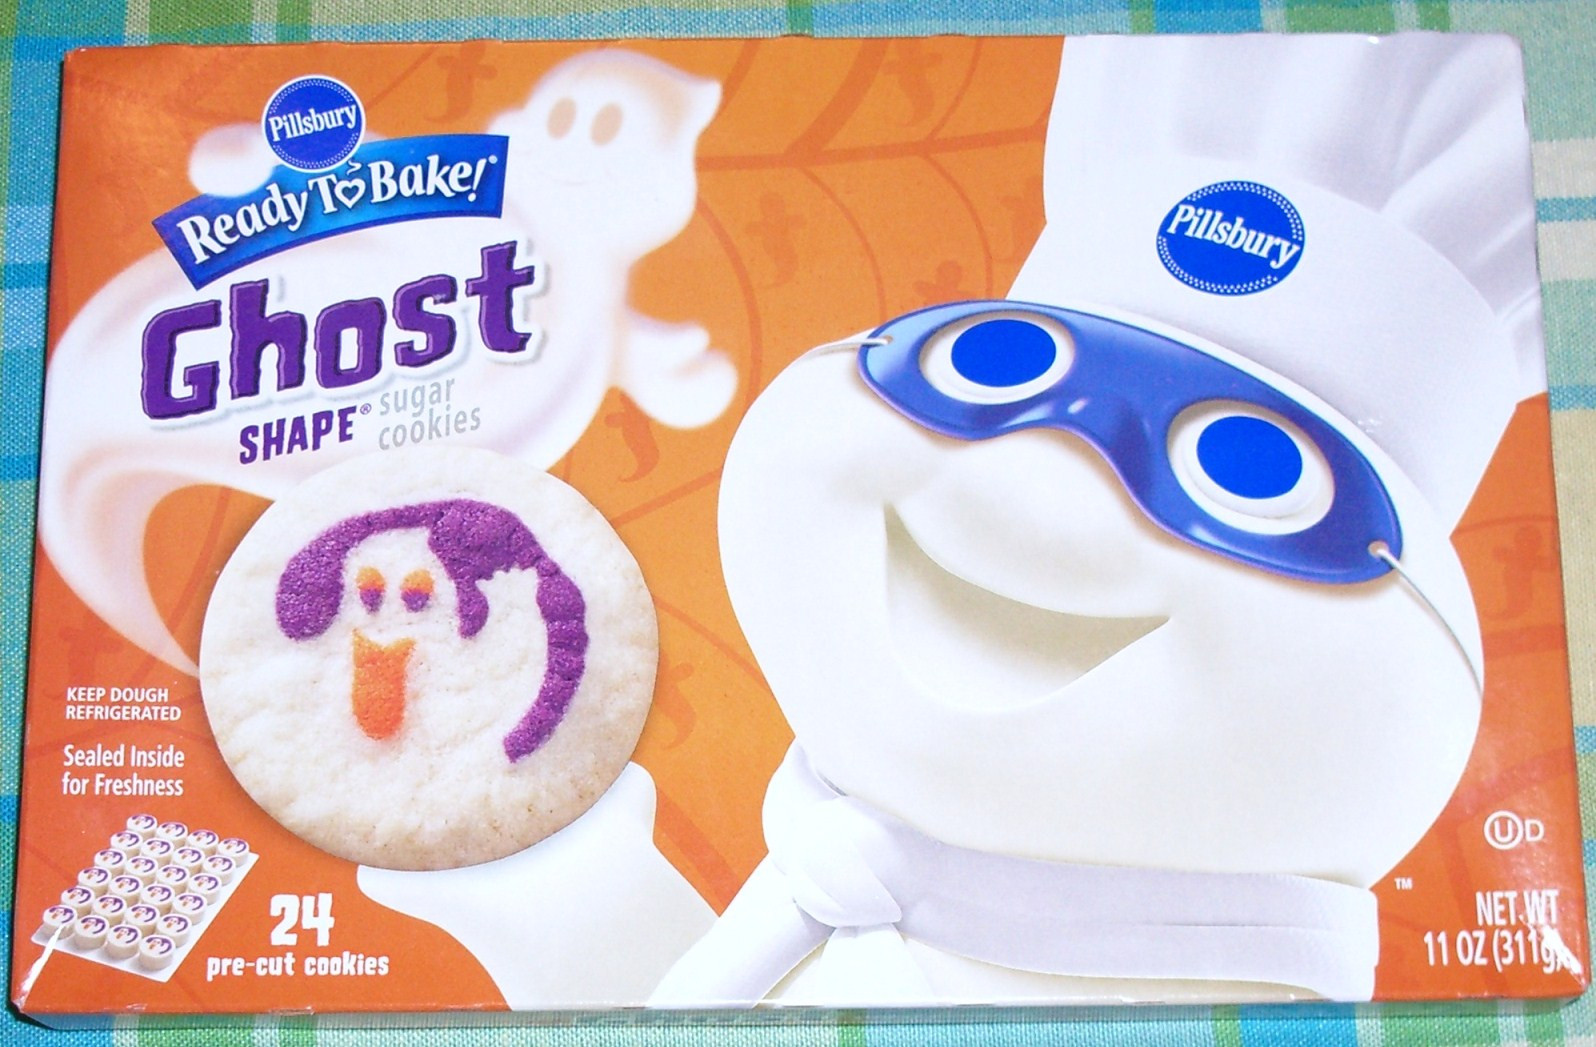 Pillsbury Halloween Cookies
 A trip to the grocery store